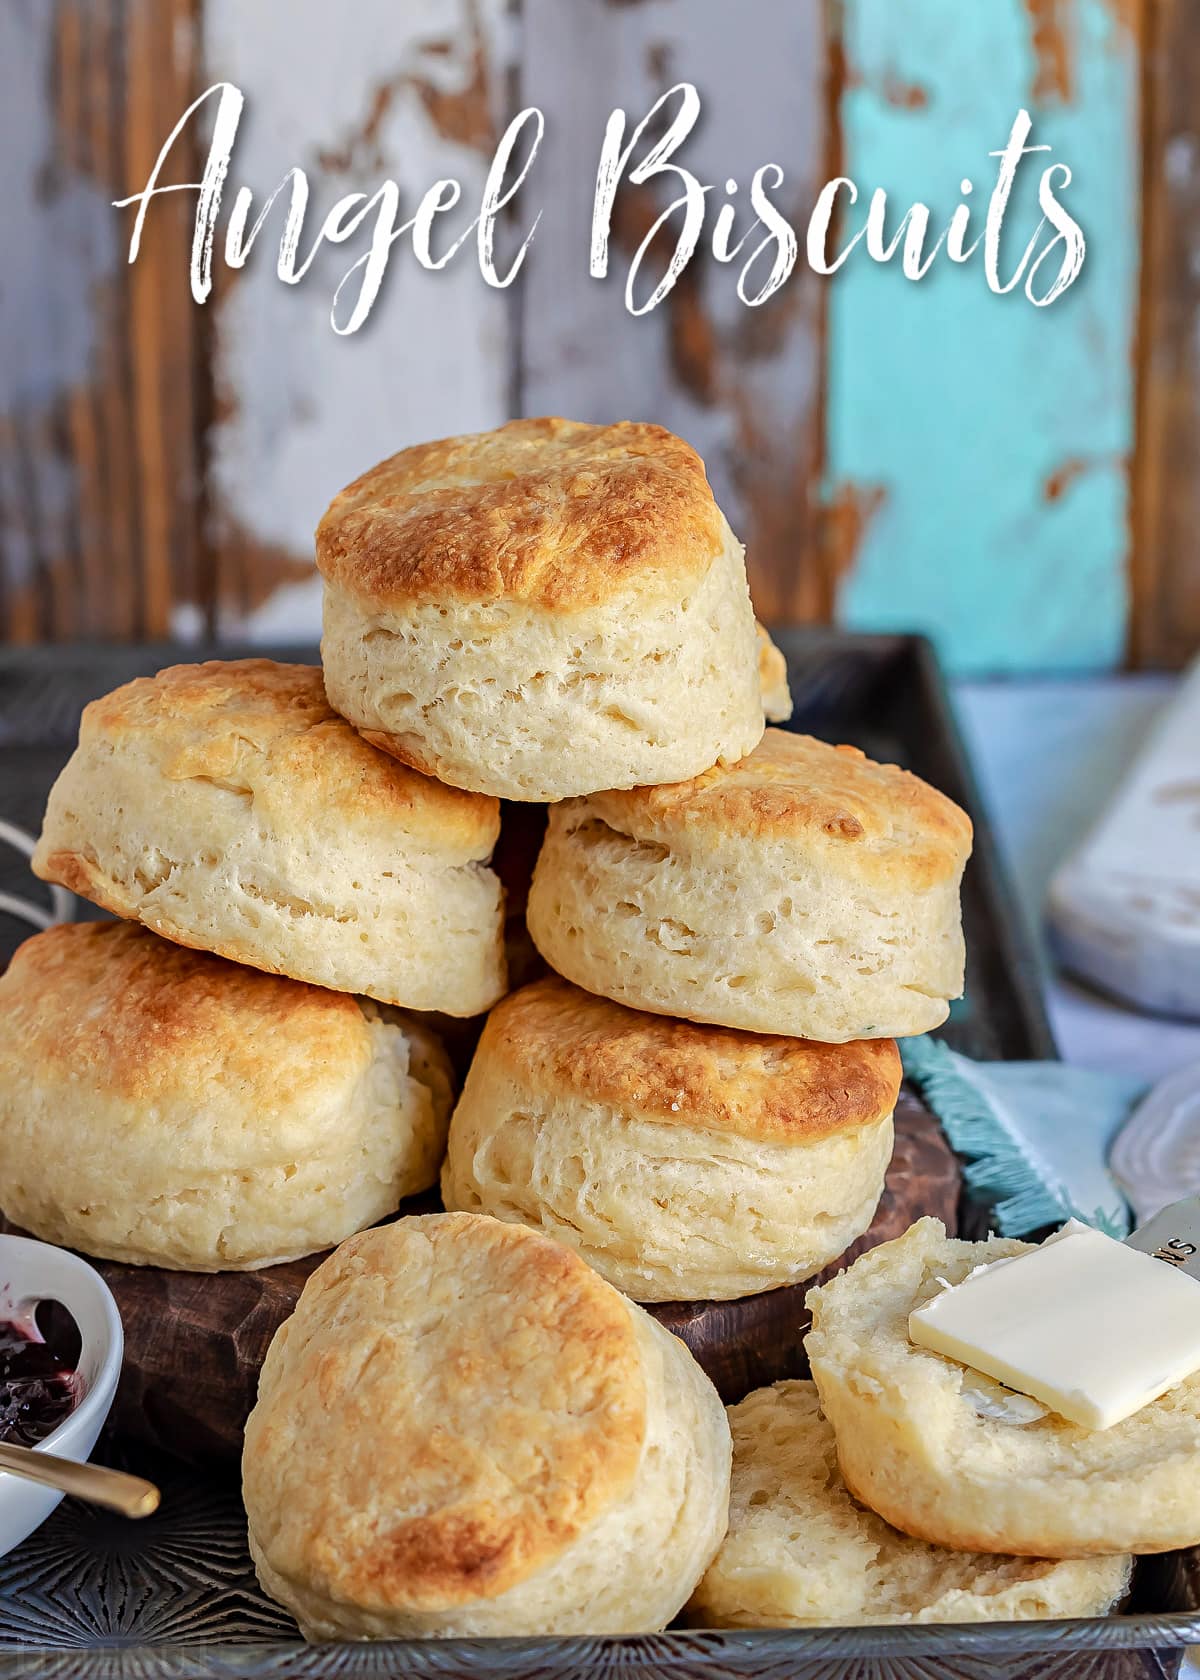 biscuits piled high in vintage sheet pan with title overlay at top of the image.